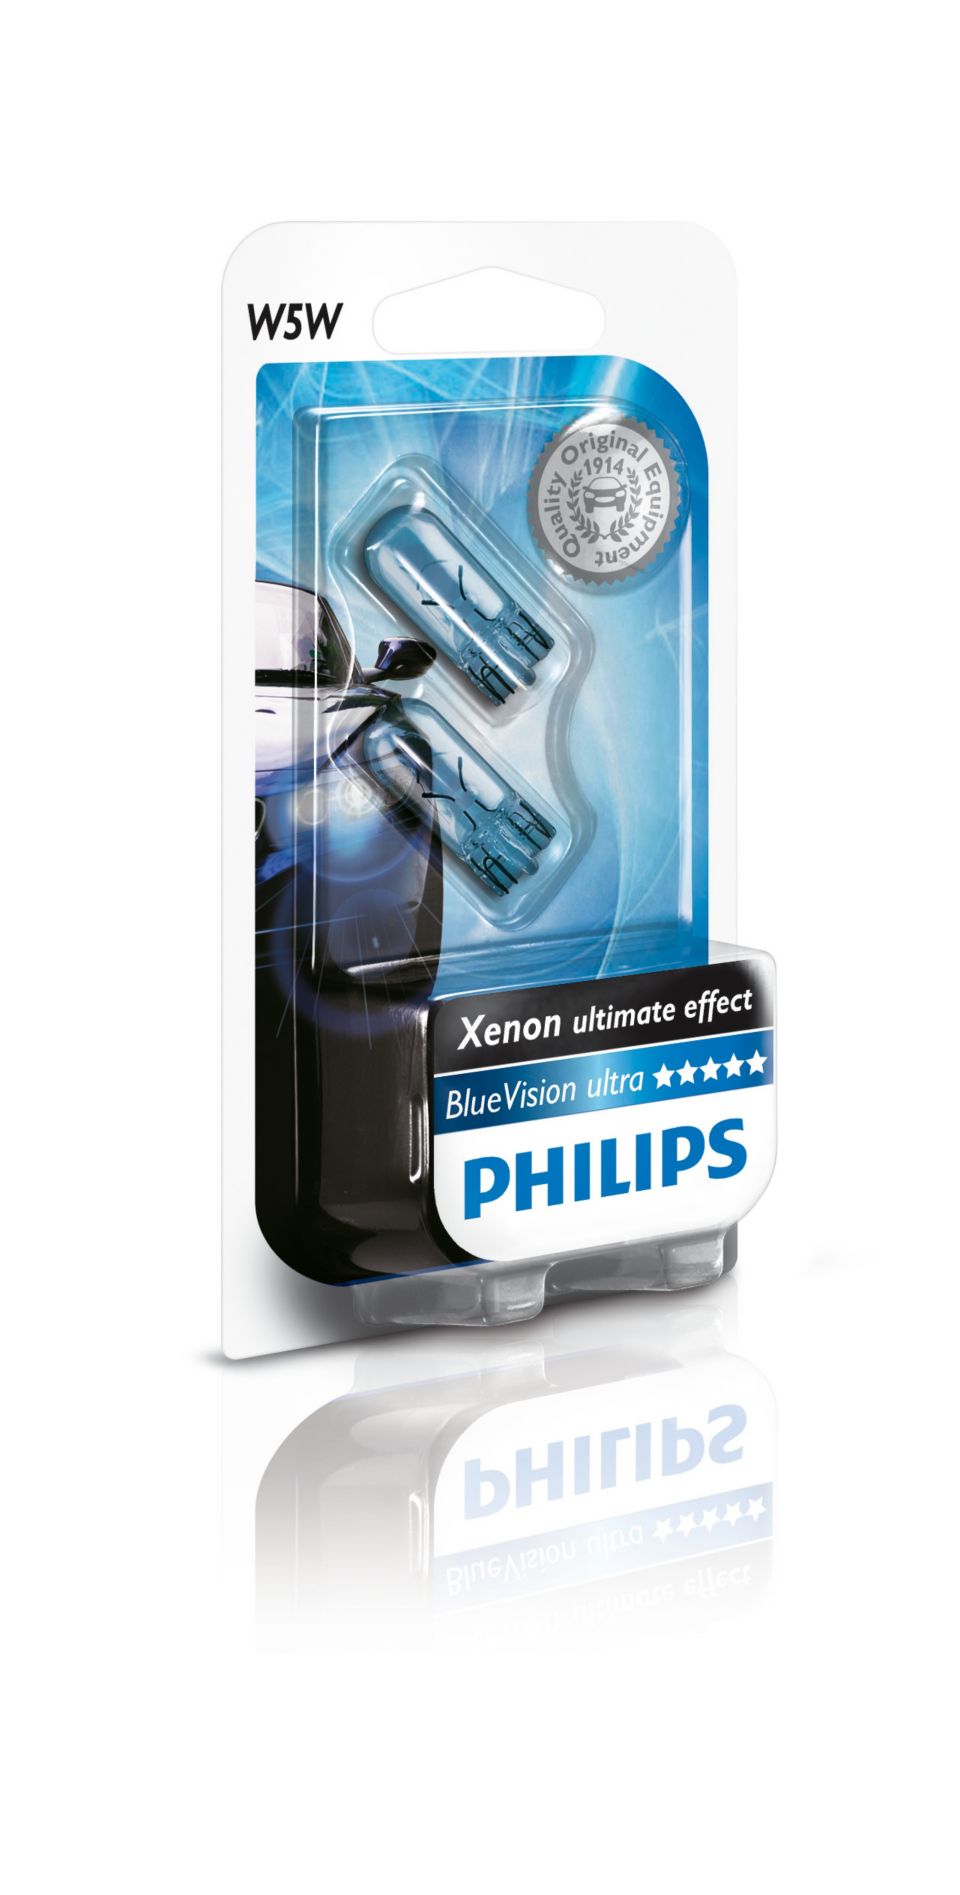 https://images.philips.com/is/image/philipsconsumer/4b8c28138c6a42f7a225afab00cff873?$jpglarge$&wid=960